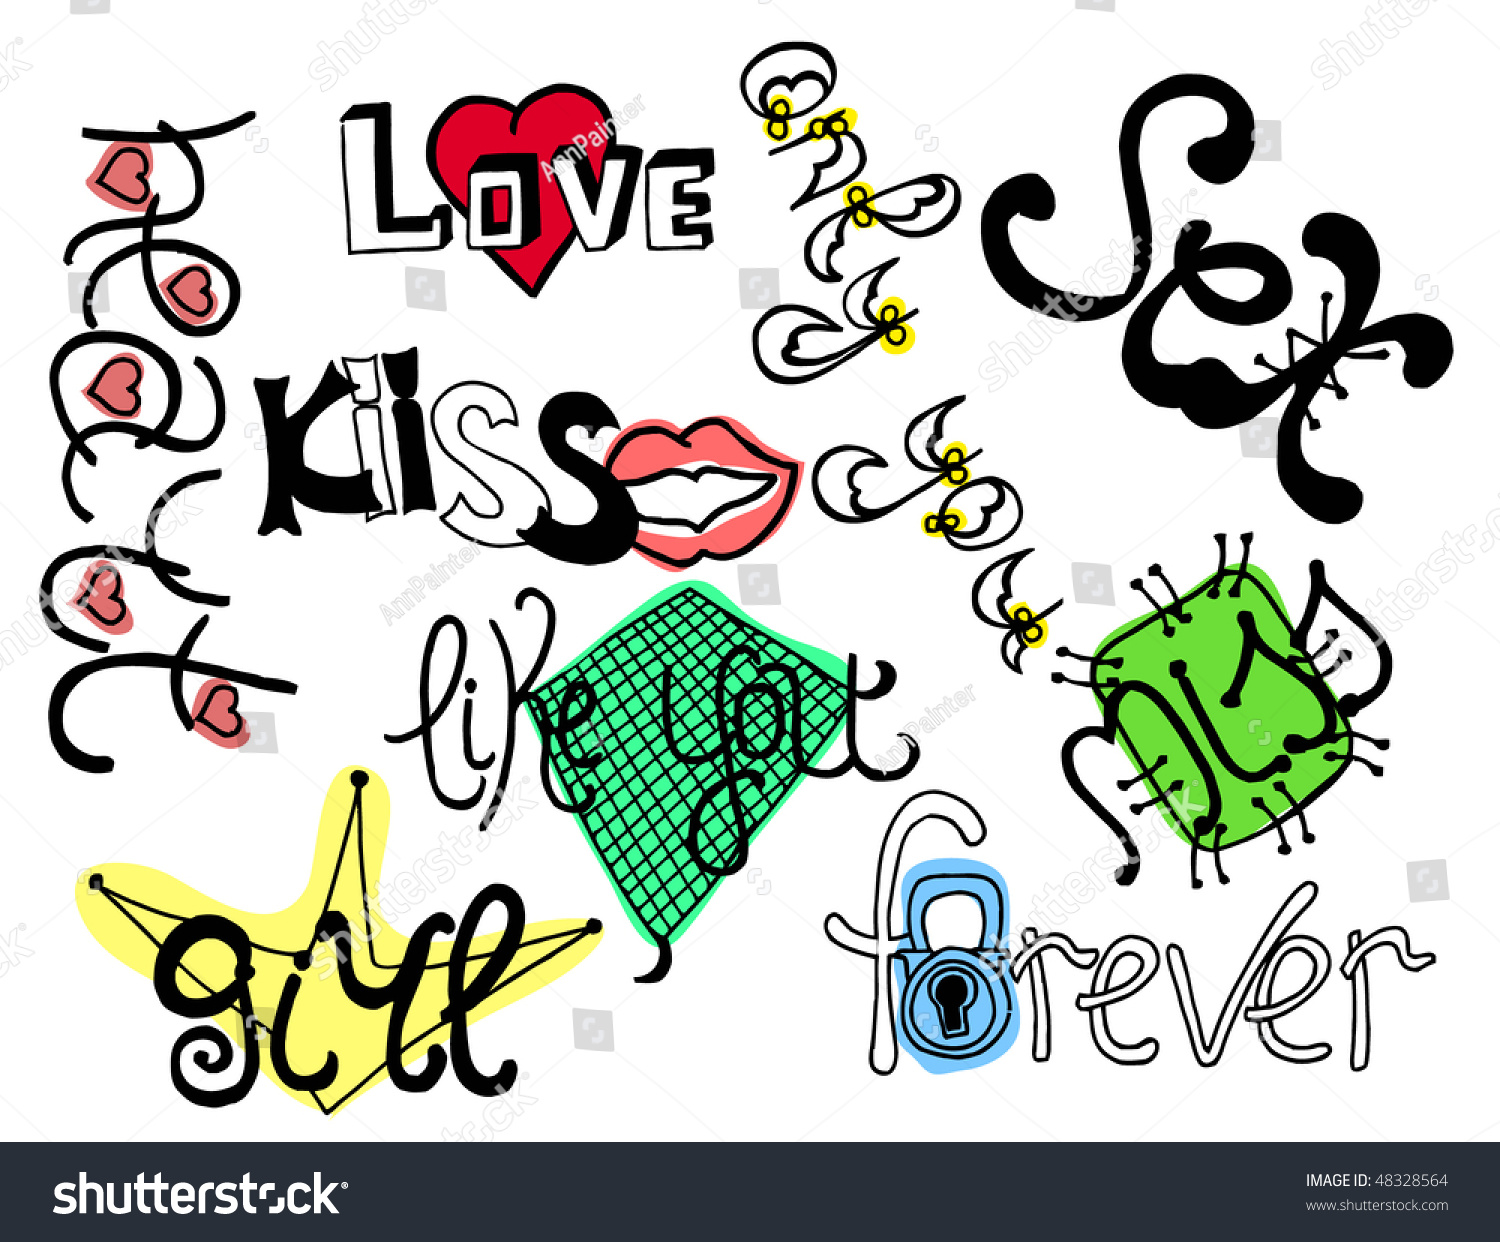 Love Doodles Text And Signs Stock Vector Illustration 48328564 ...